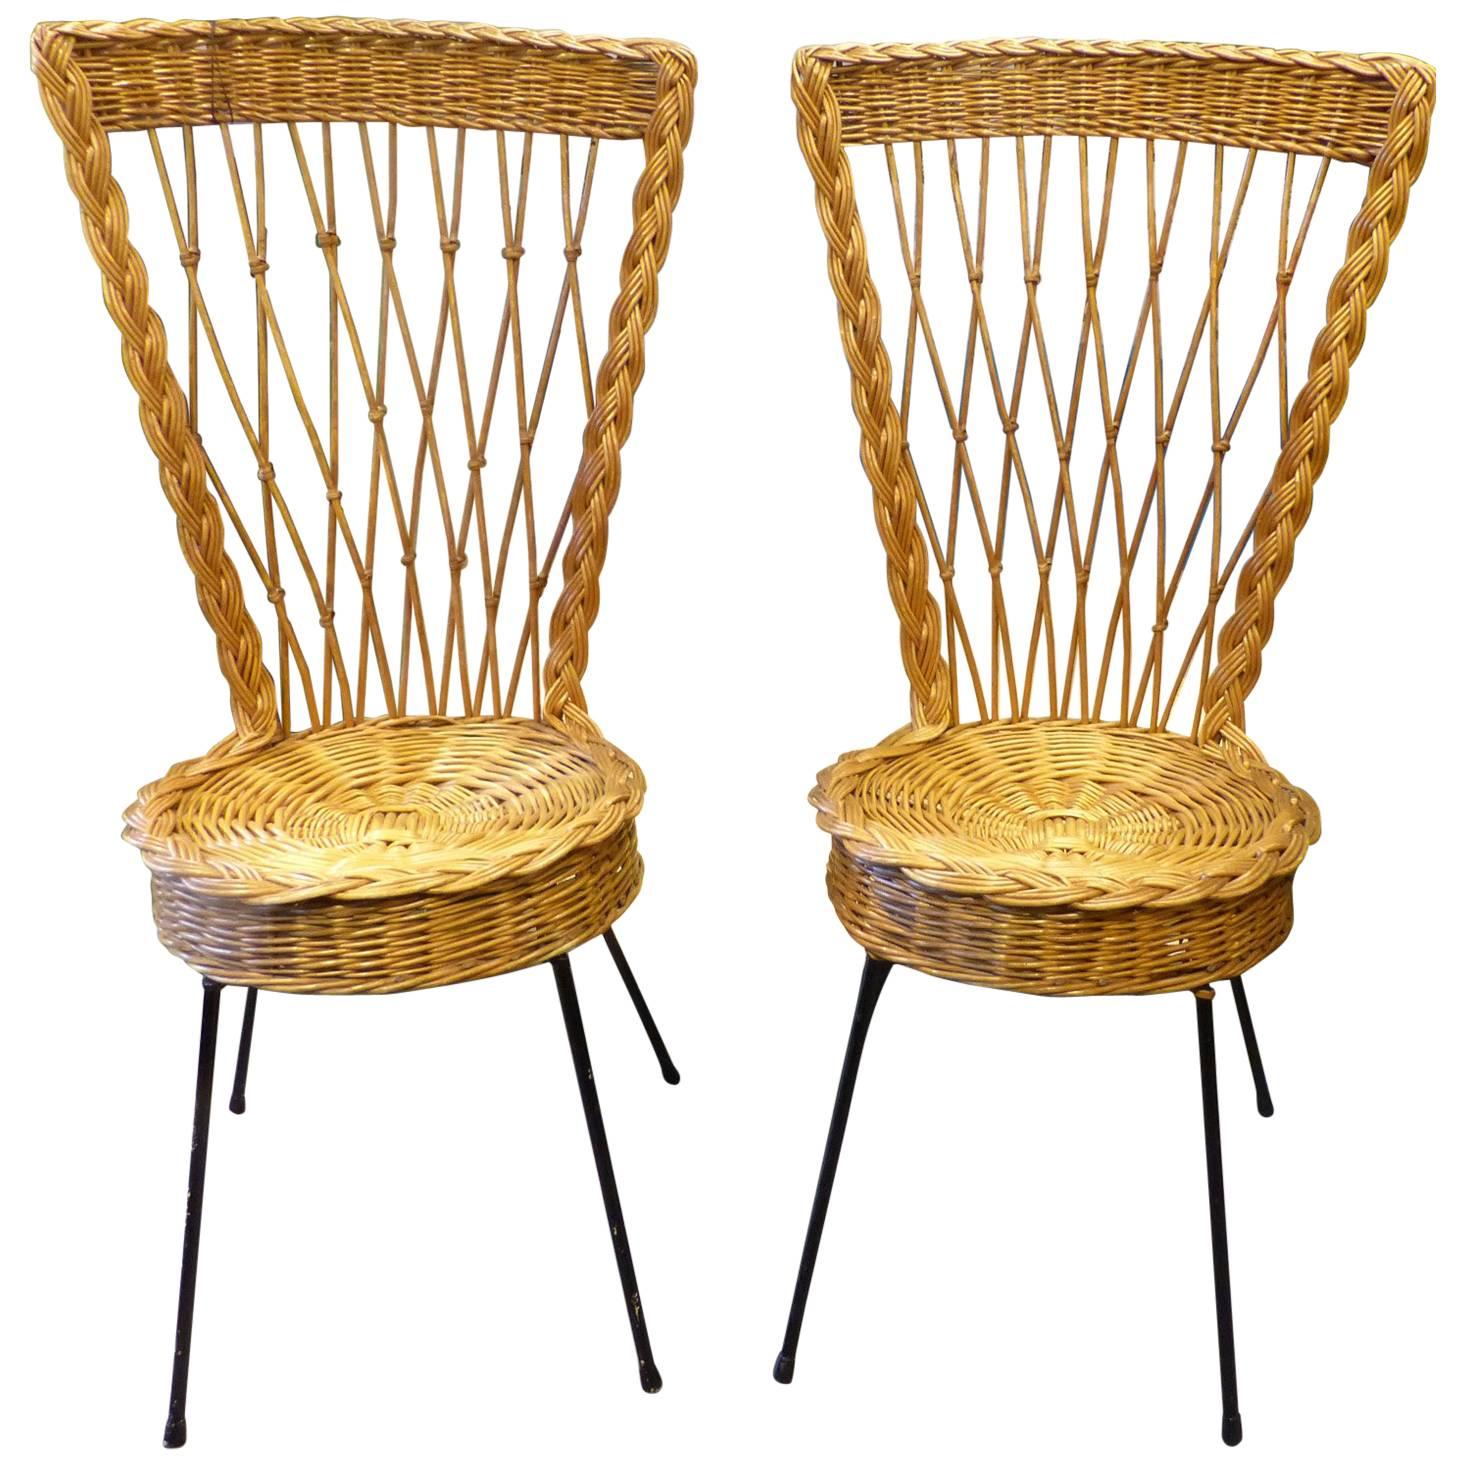 Beautiful Pair of 1960 French Wicker Chairs For Sale